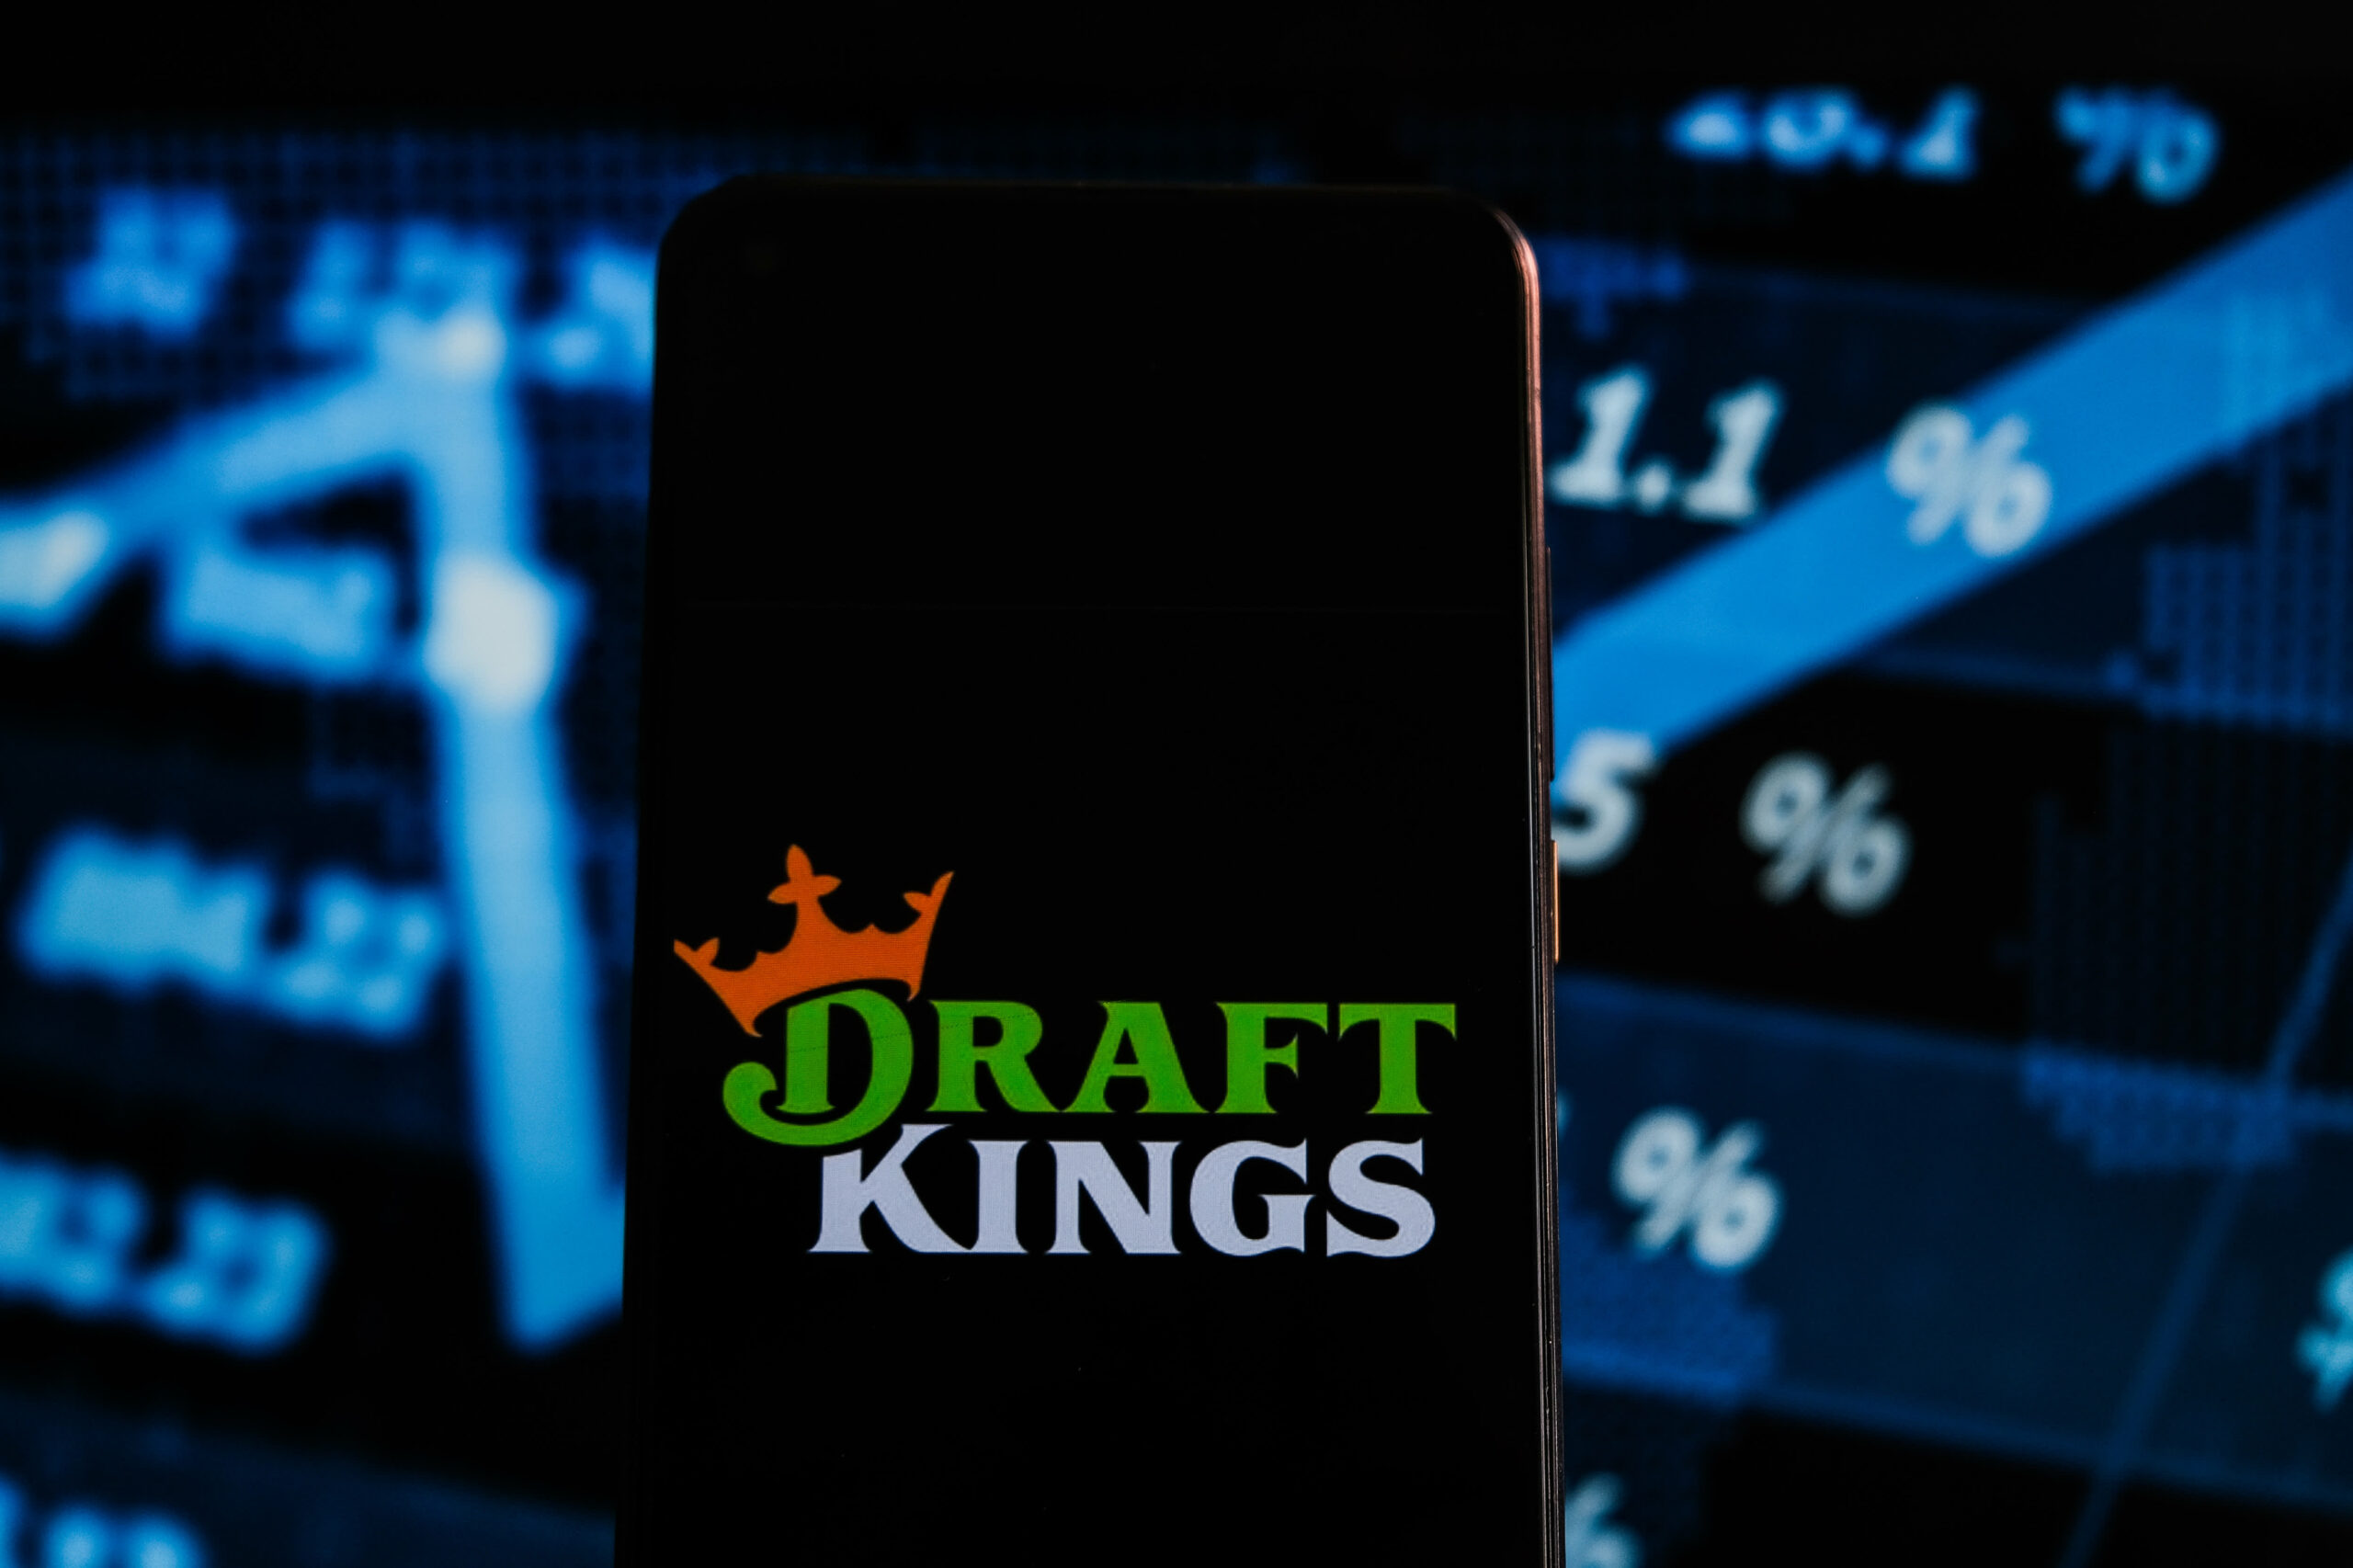 DraftKings makes $20 billion offer for UK sports betting company Entain, sources say